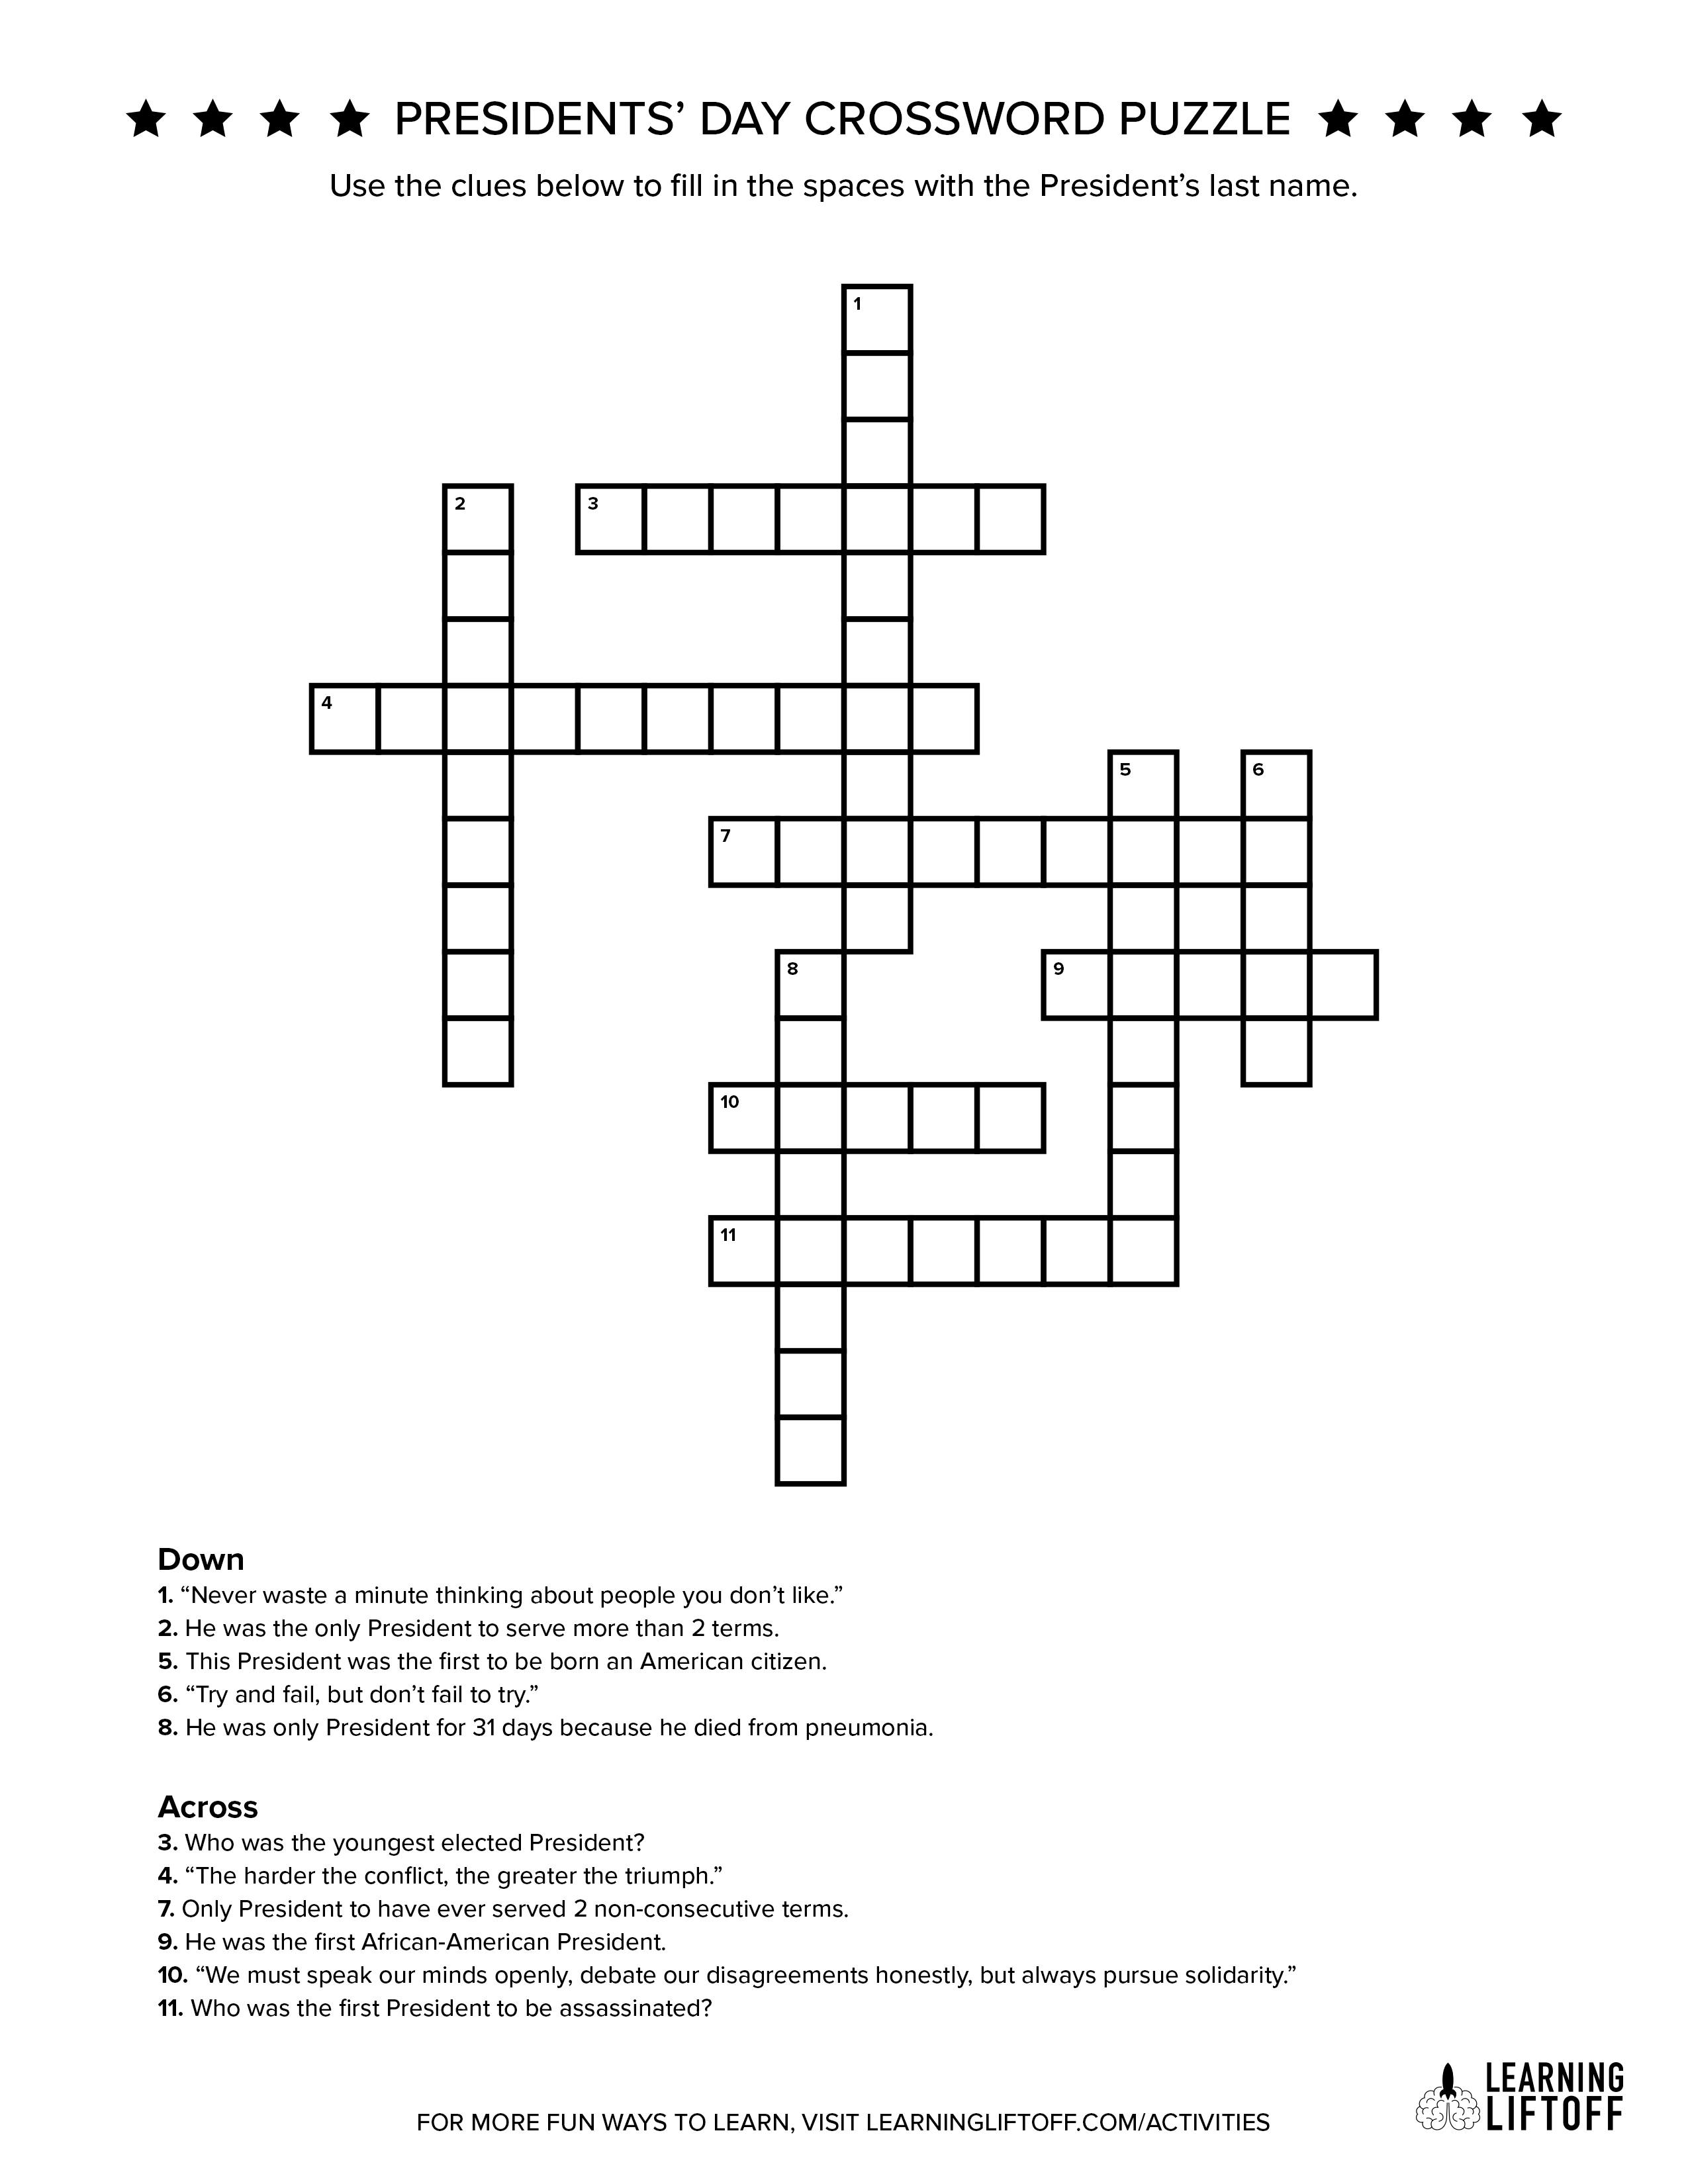 How Much Do You Know About Our U.s. Presidents? - Learning Liftoff - Presidents Crossword Puzzle Printable